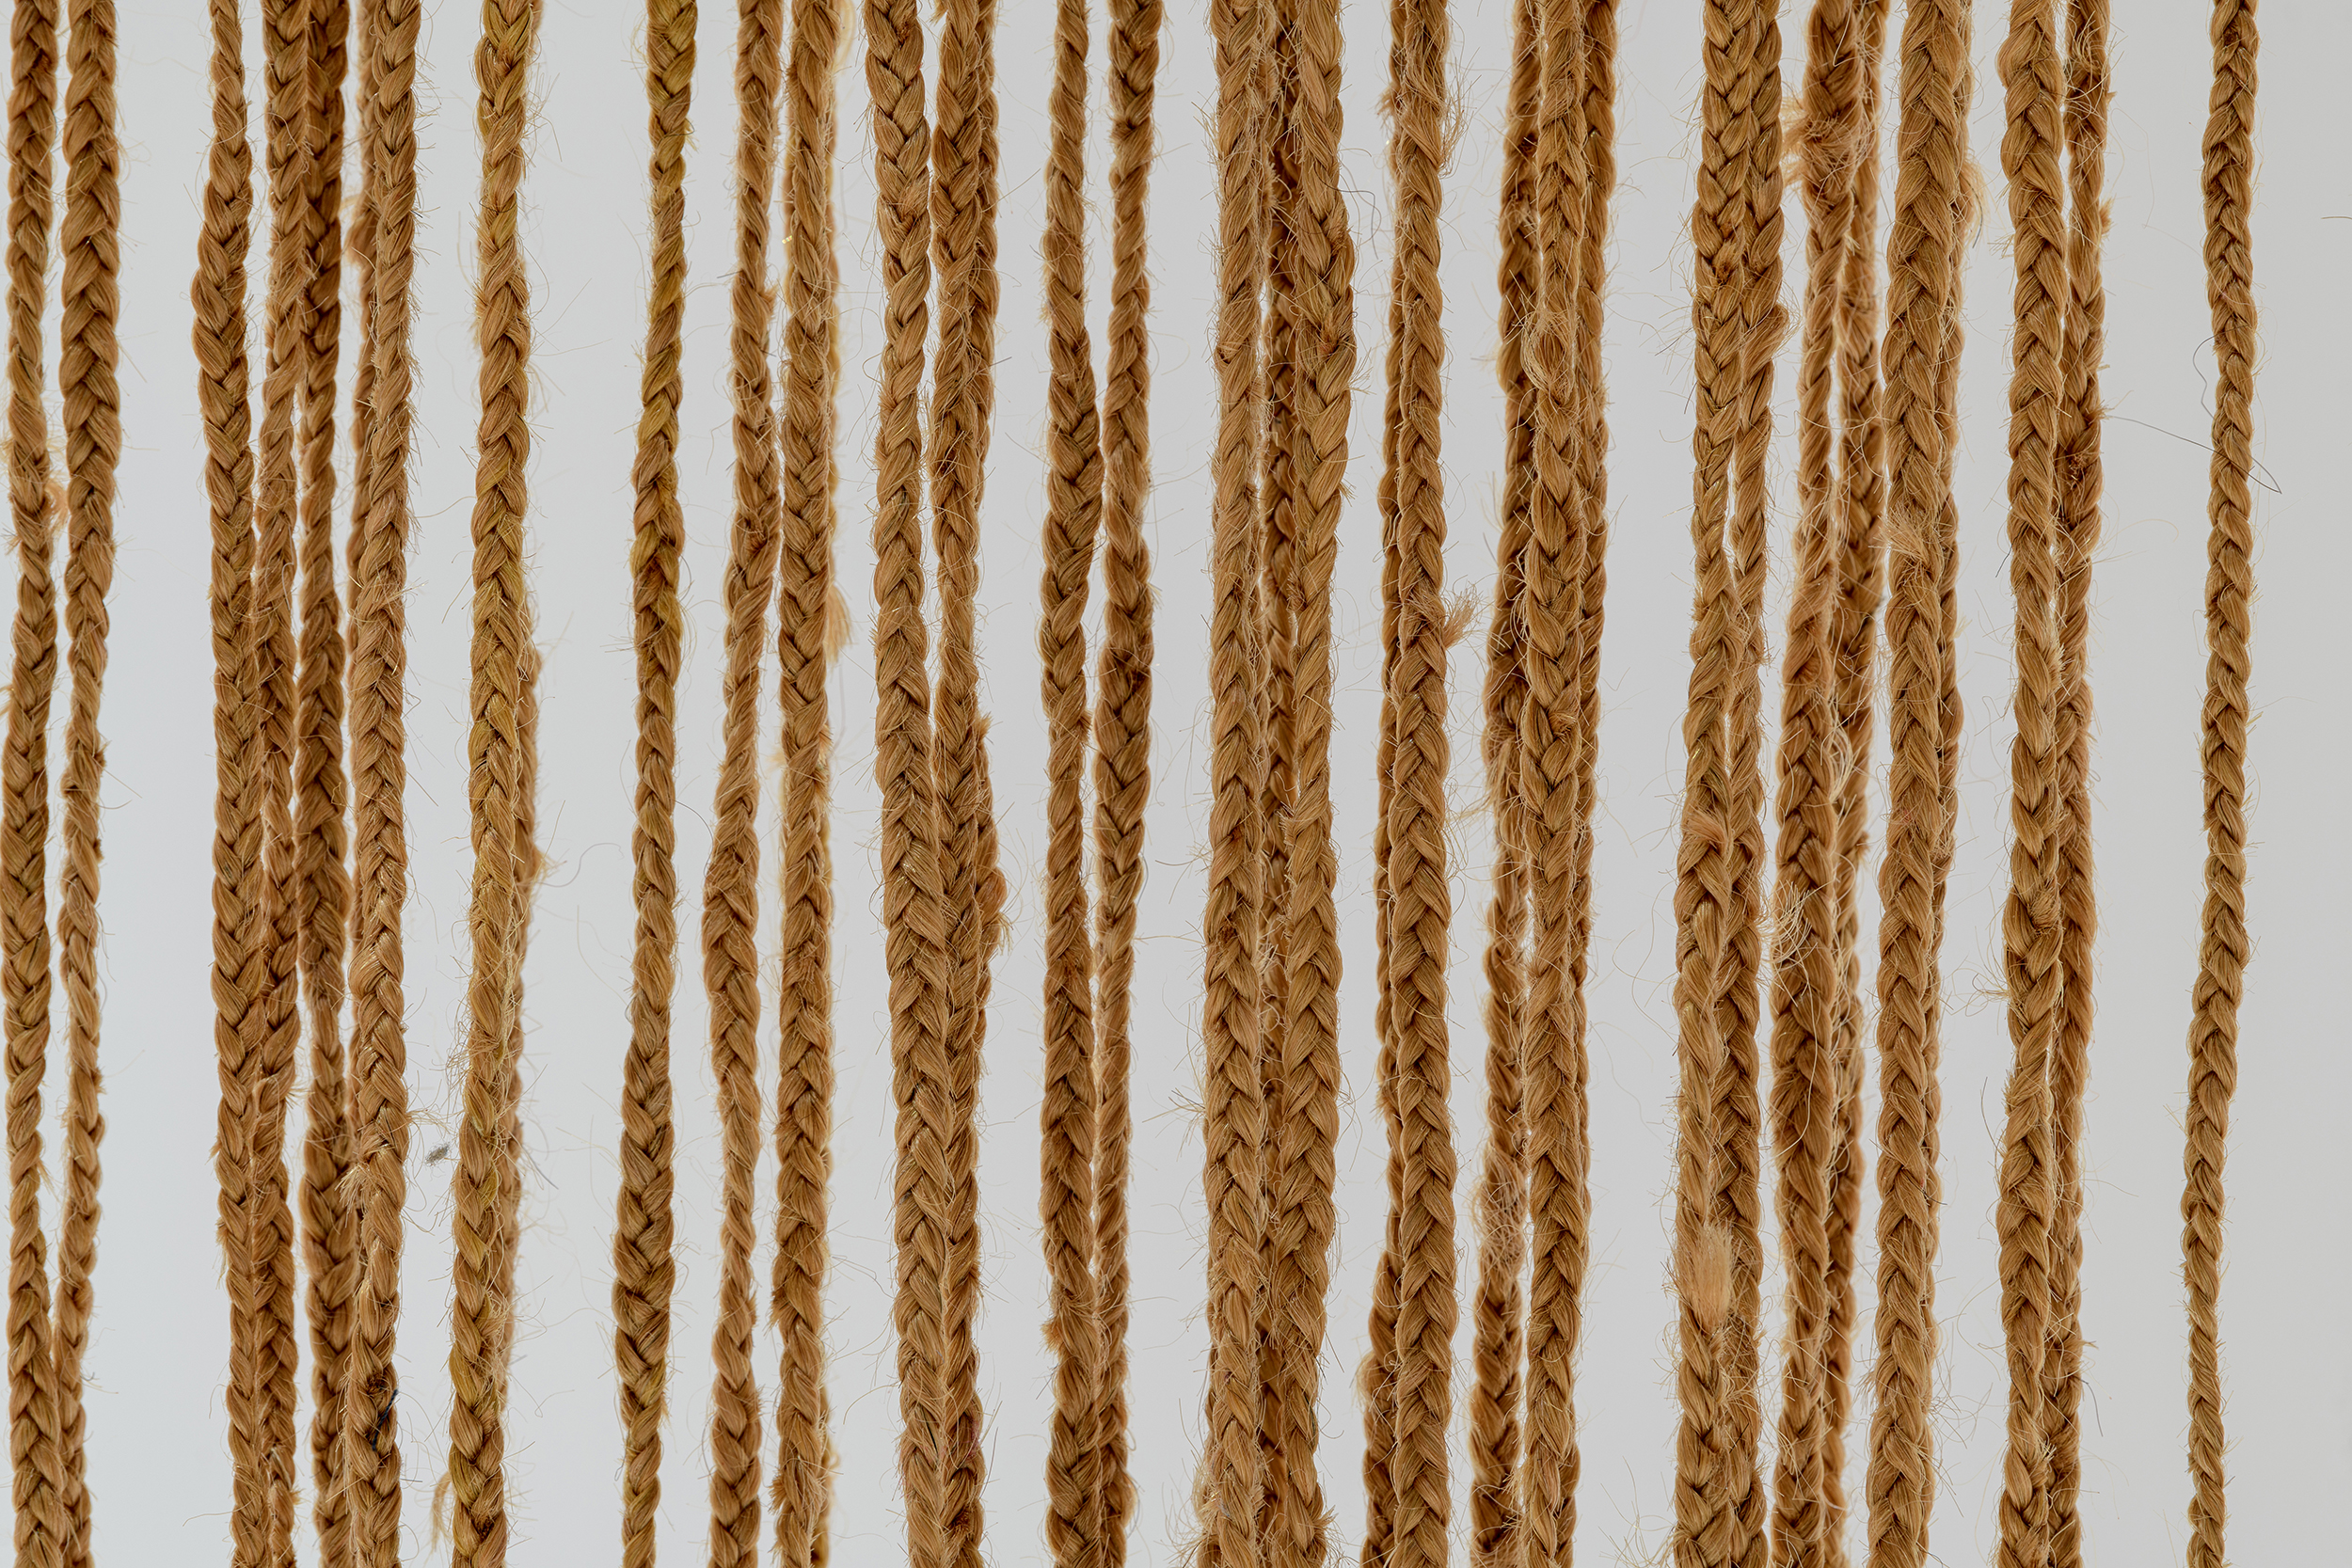 Close up of more than 20 braided strands of brown hair